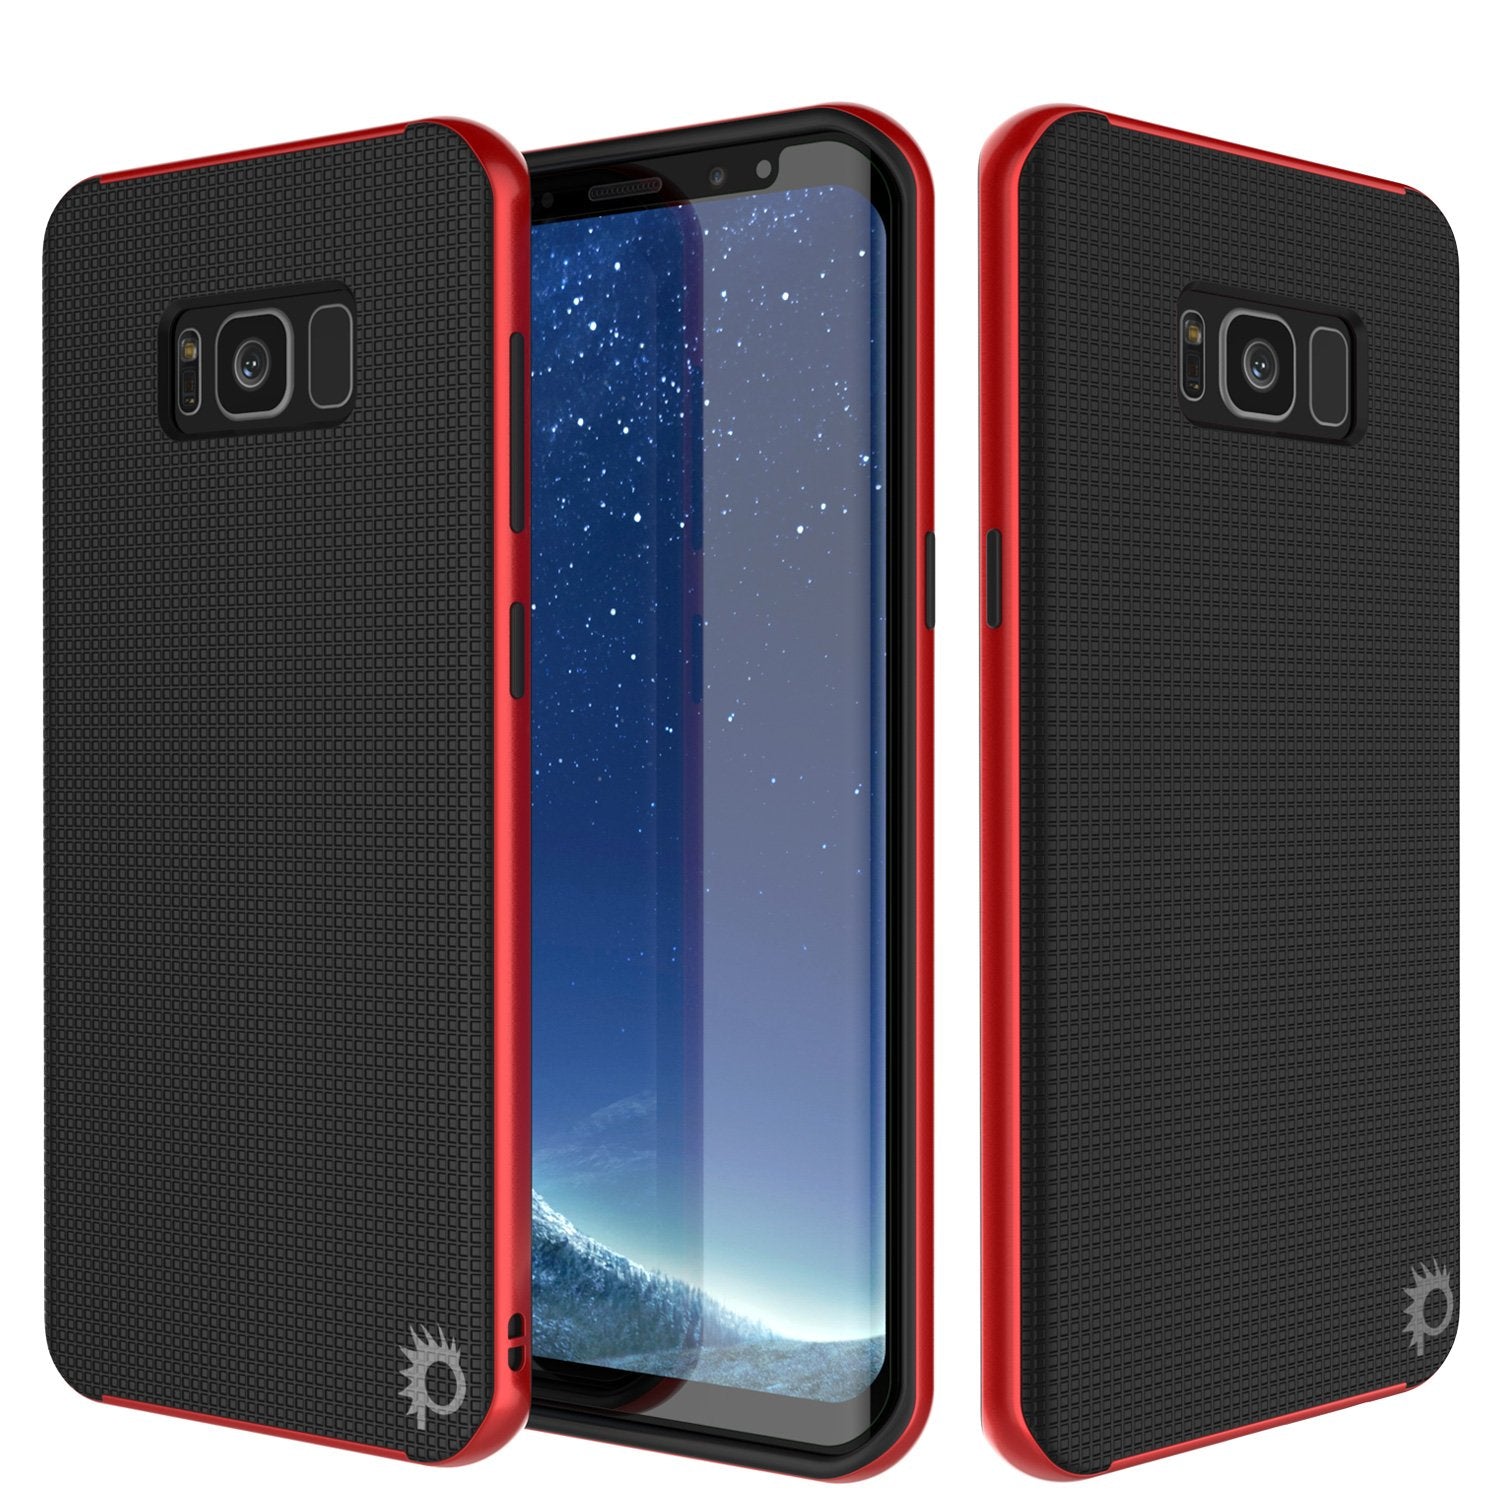 Galaxy S8 PLUS Case, PunkCase [Stealth Series] Hybrid 3-Piece Shockproof Dual Layer Cover [Non-Slip] [Soft TPU + PC Bumper] with PUNKSHIELD Screen Protector for Samsung S8+ [Red]